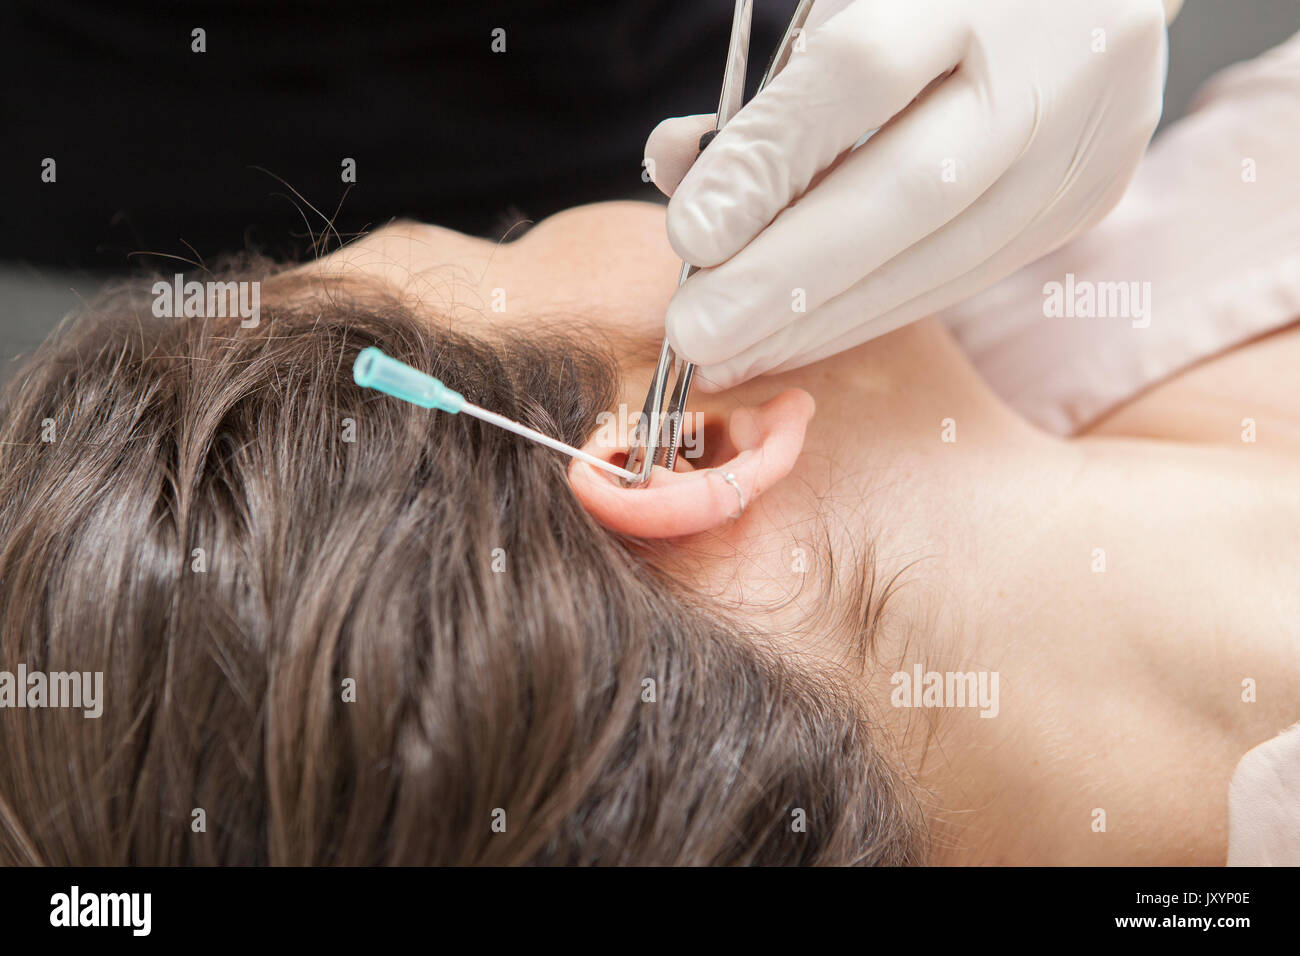 Professional making a piercing hole on ear with indwelling cannula method. Rook type. Holding the cannula Stock Photo